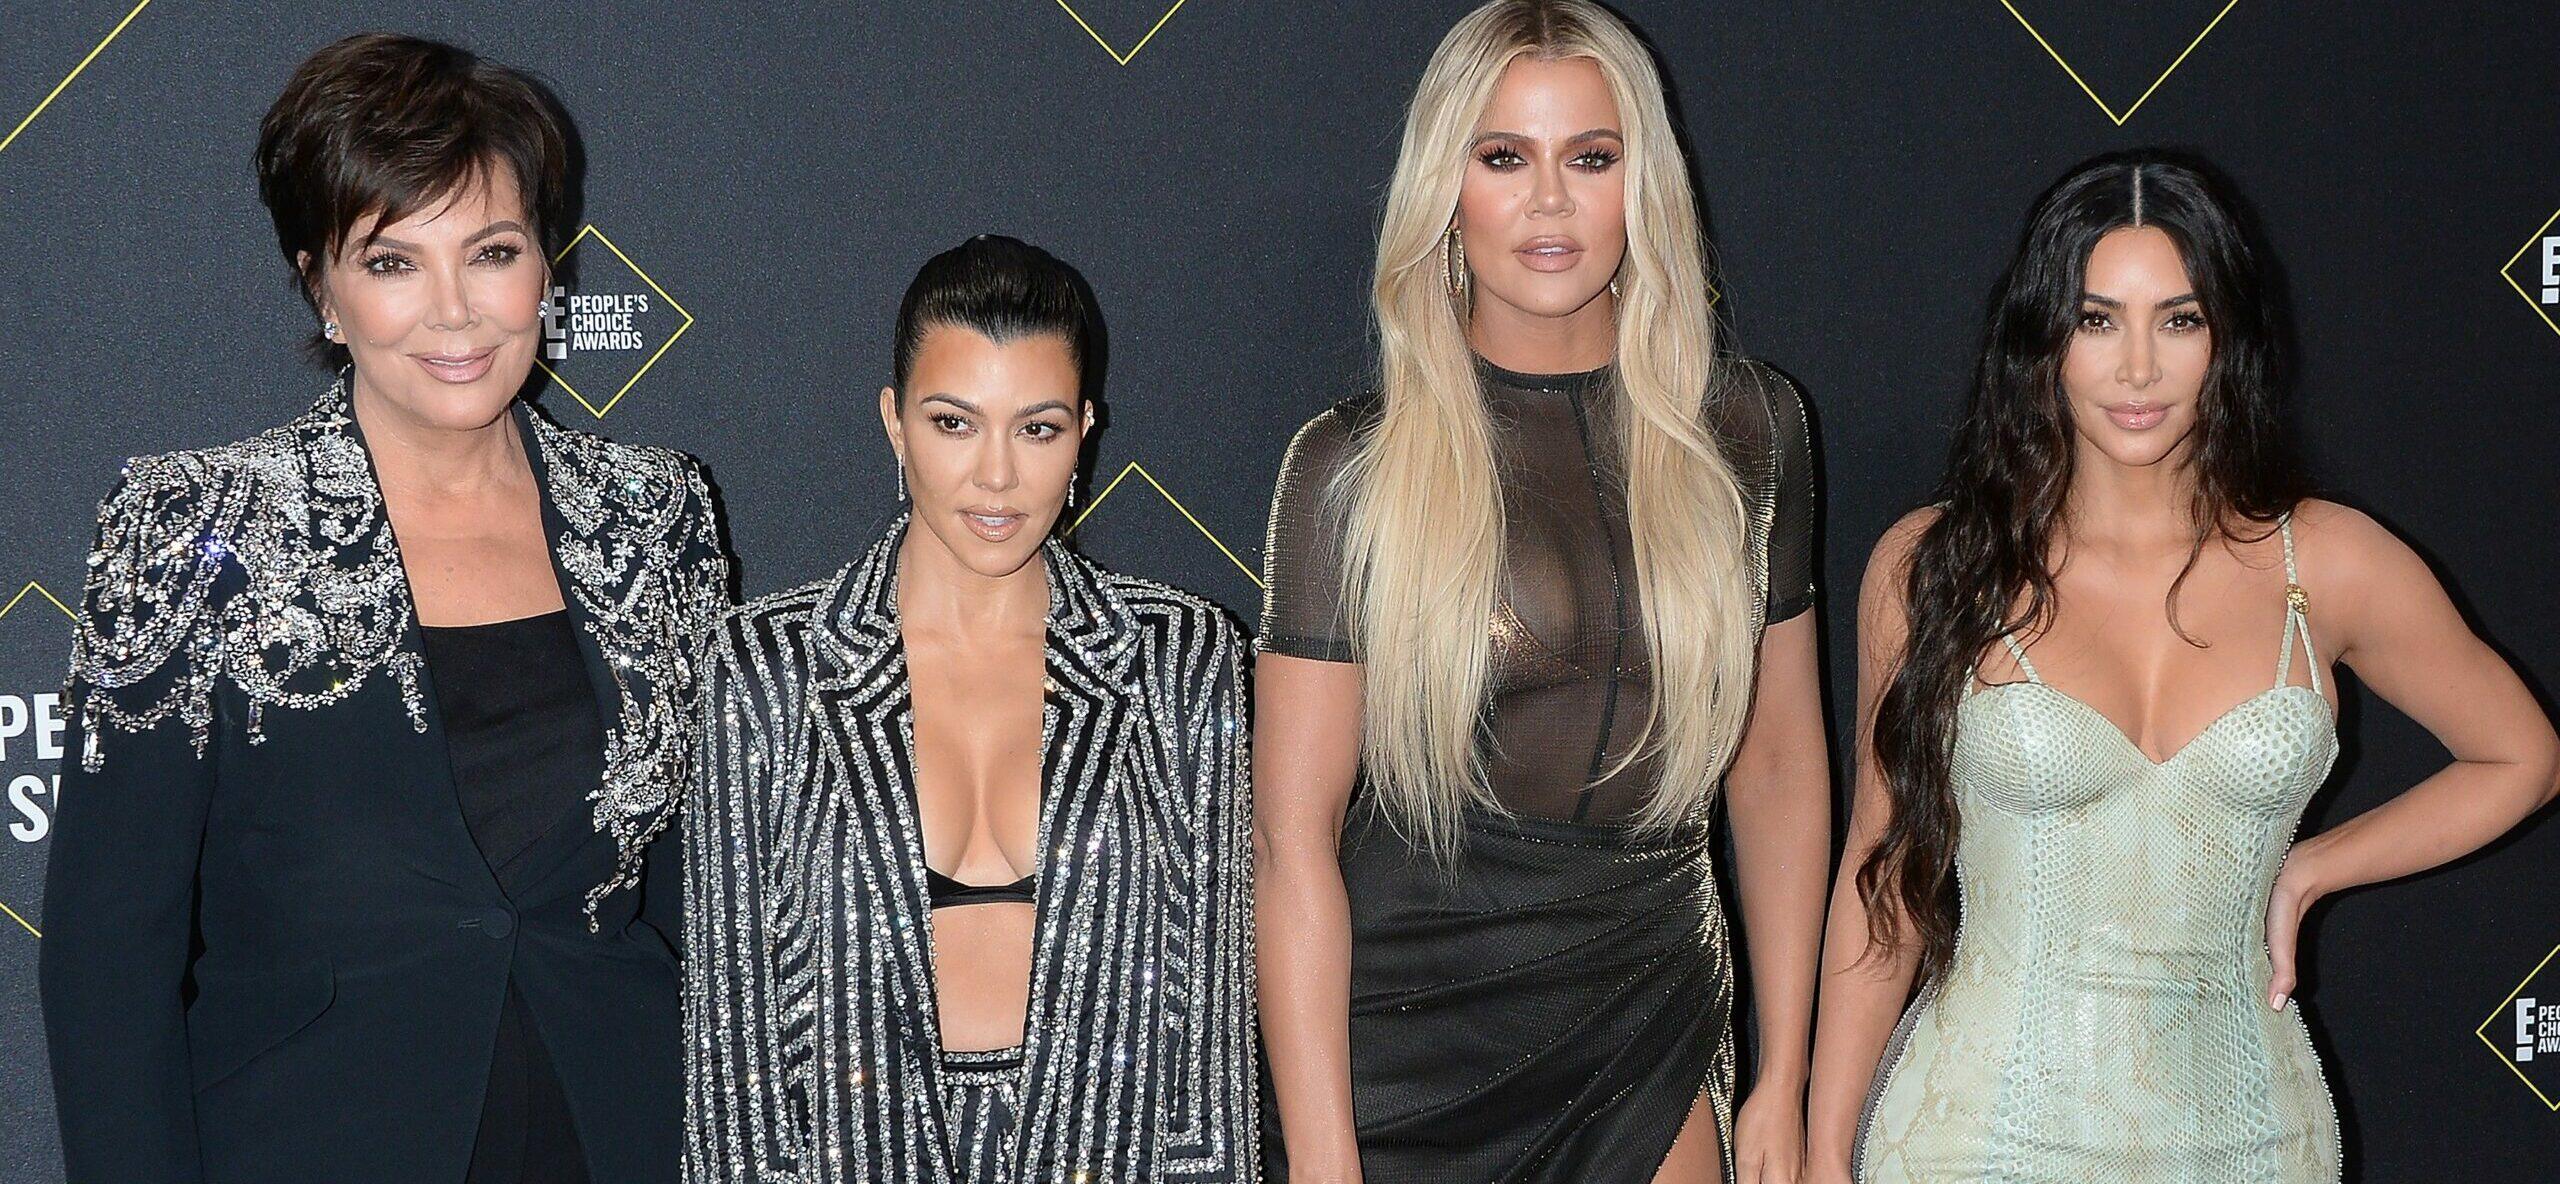 Kim Kardashian Shares Amazing Footage Of Family's 'Star Search' Audition